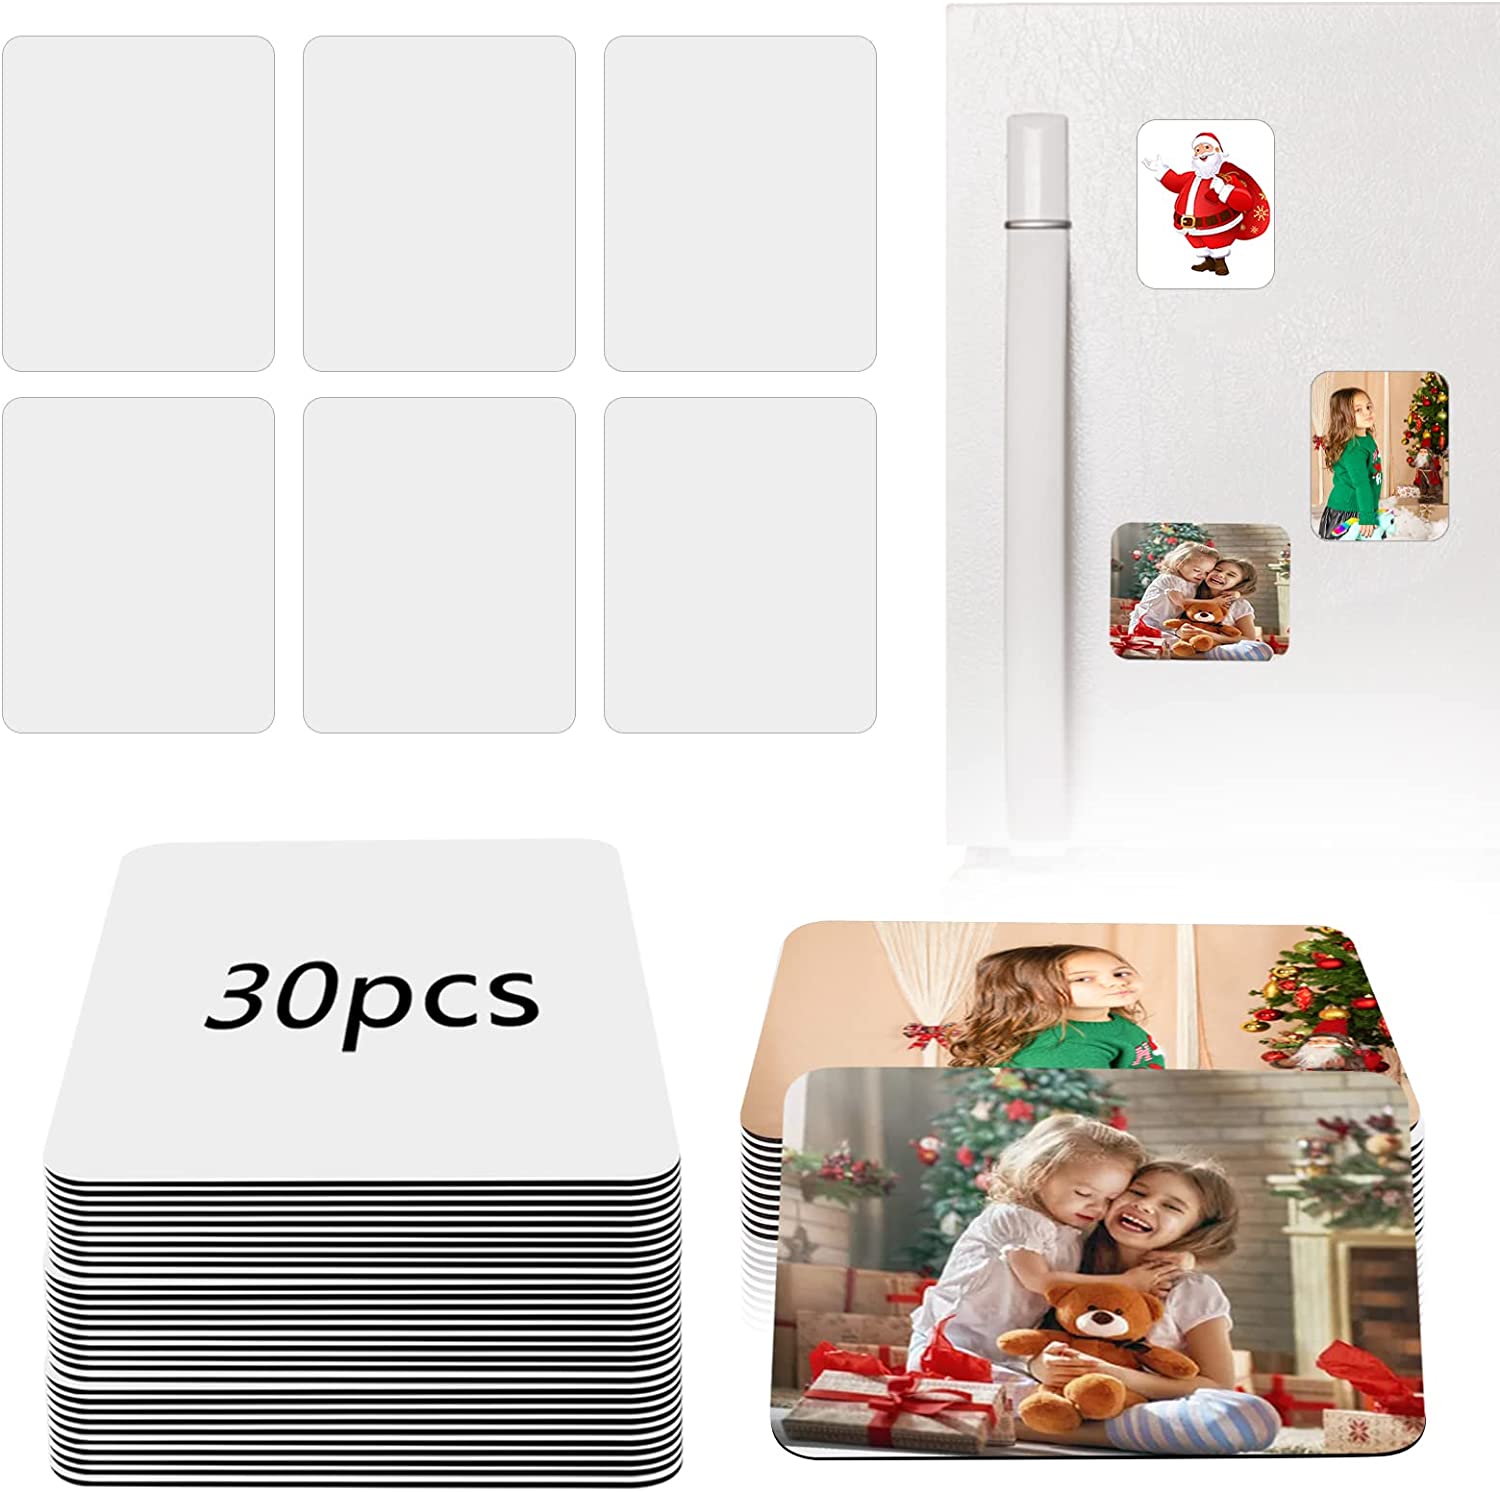  77PCS Sublimation Blanks Products, MAPVOLU Christmas Ornaments  Crafts Sublimation Starter Kit with Instruction Manual, Blank Makeup Bags,  Backpack, Dog Tags, Coasters Keychains Mouse Pads Garden Flags : Arts,  Crafts & Sewing